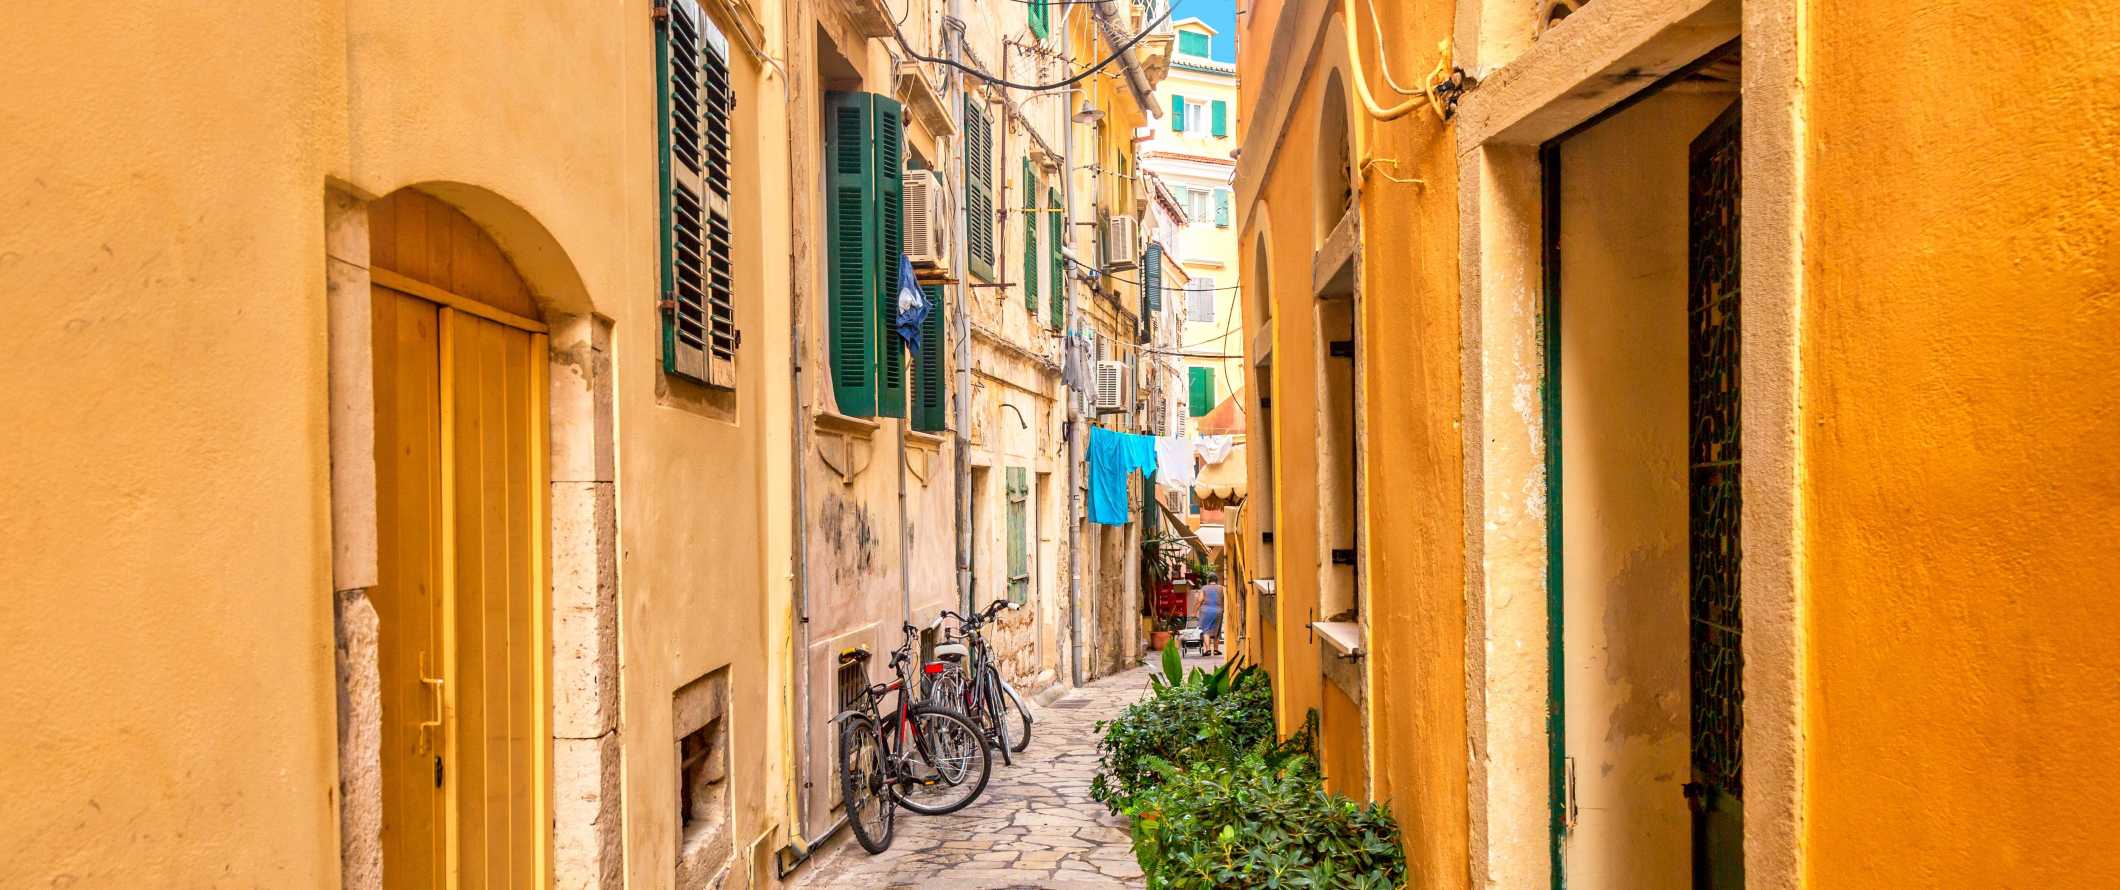 Small, flagstoned street lined with bright yellow buildings with green shutters in Corfu, Greece.